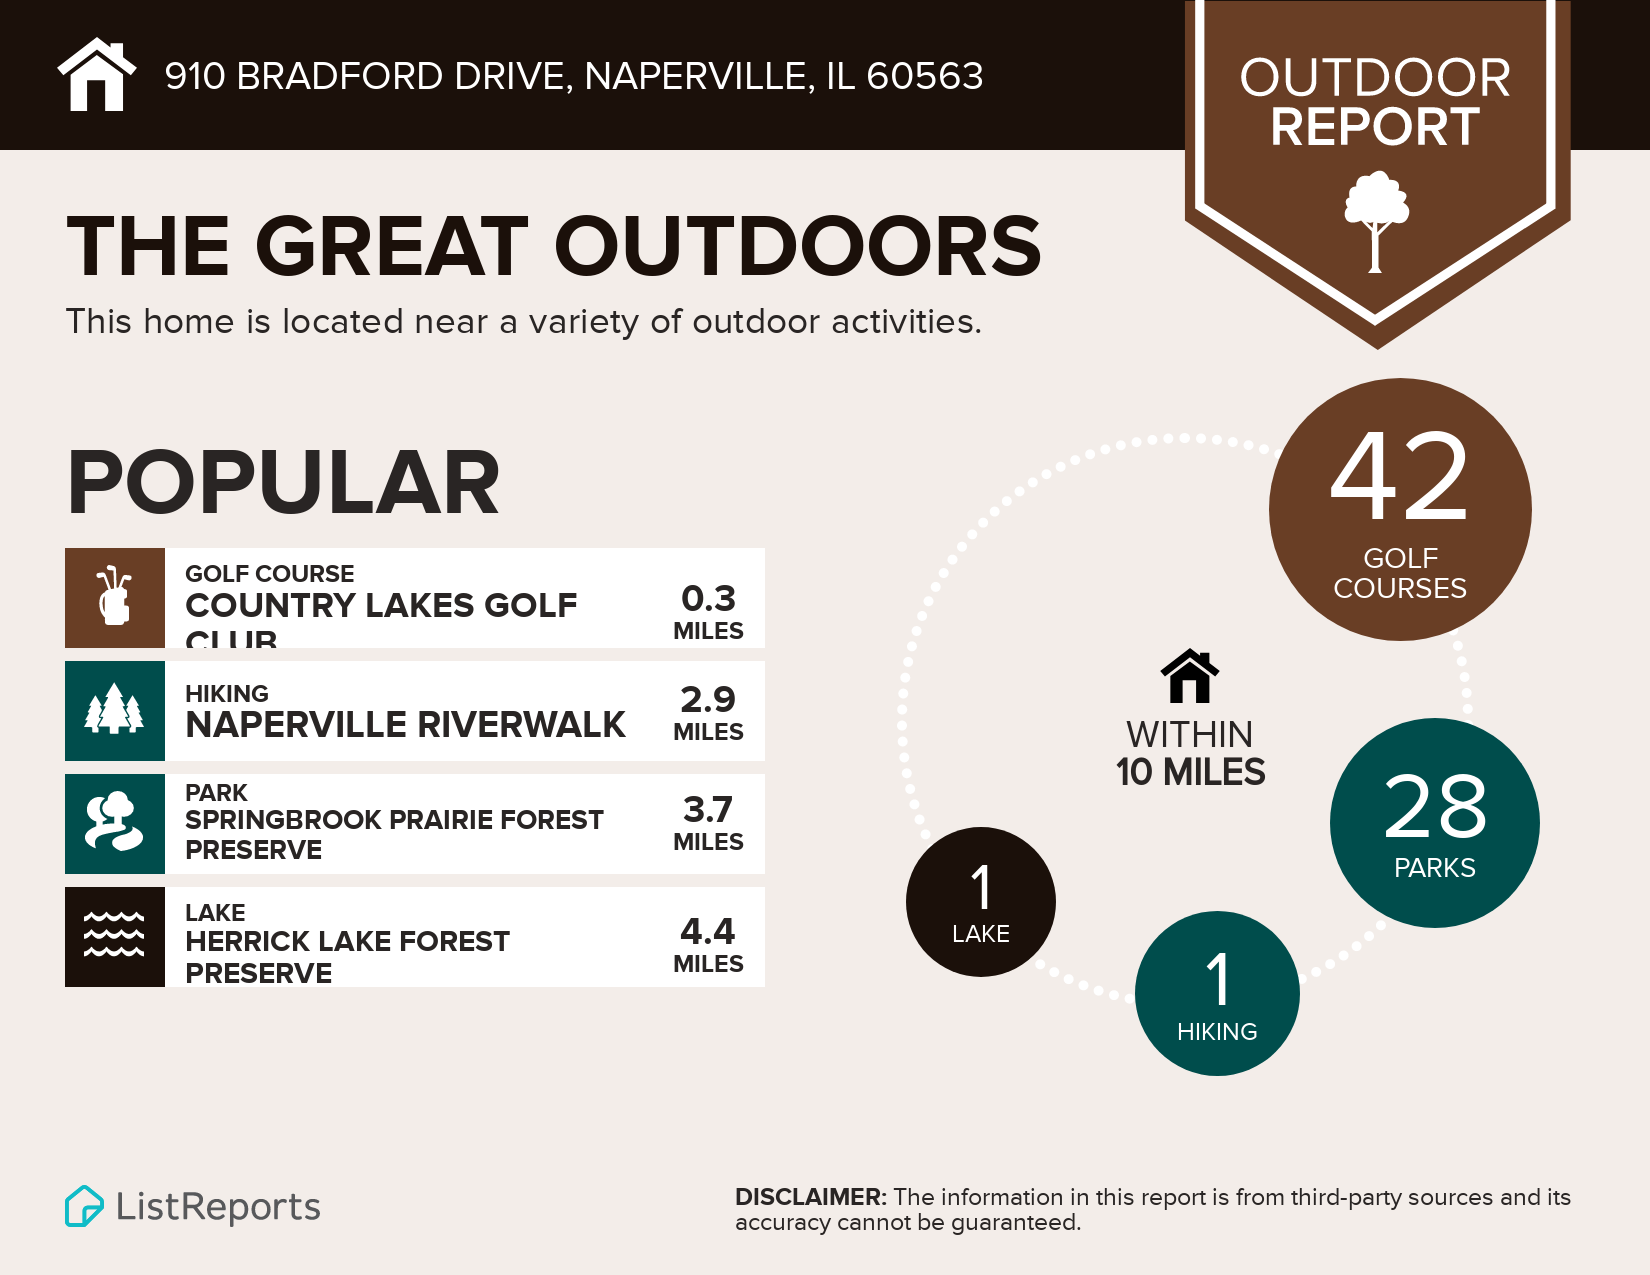 Outdoor Report for 910 Bradford Dr, Naperville, IL